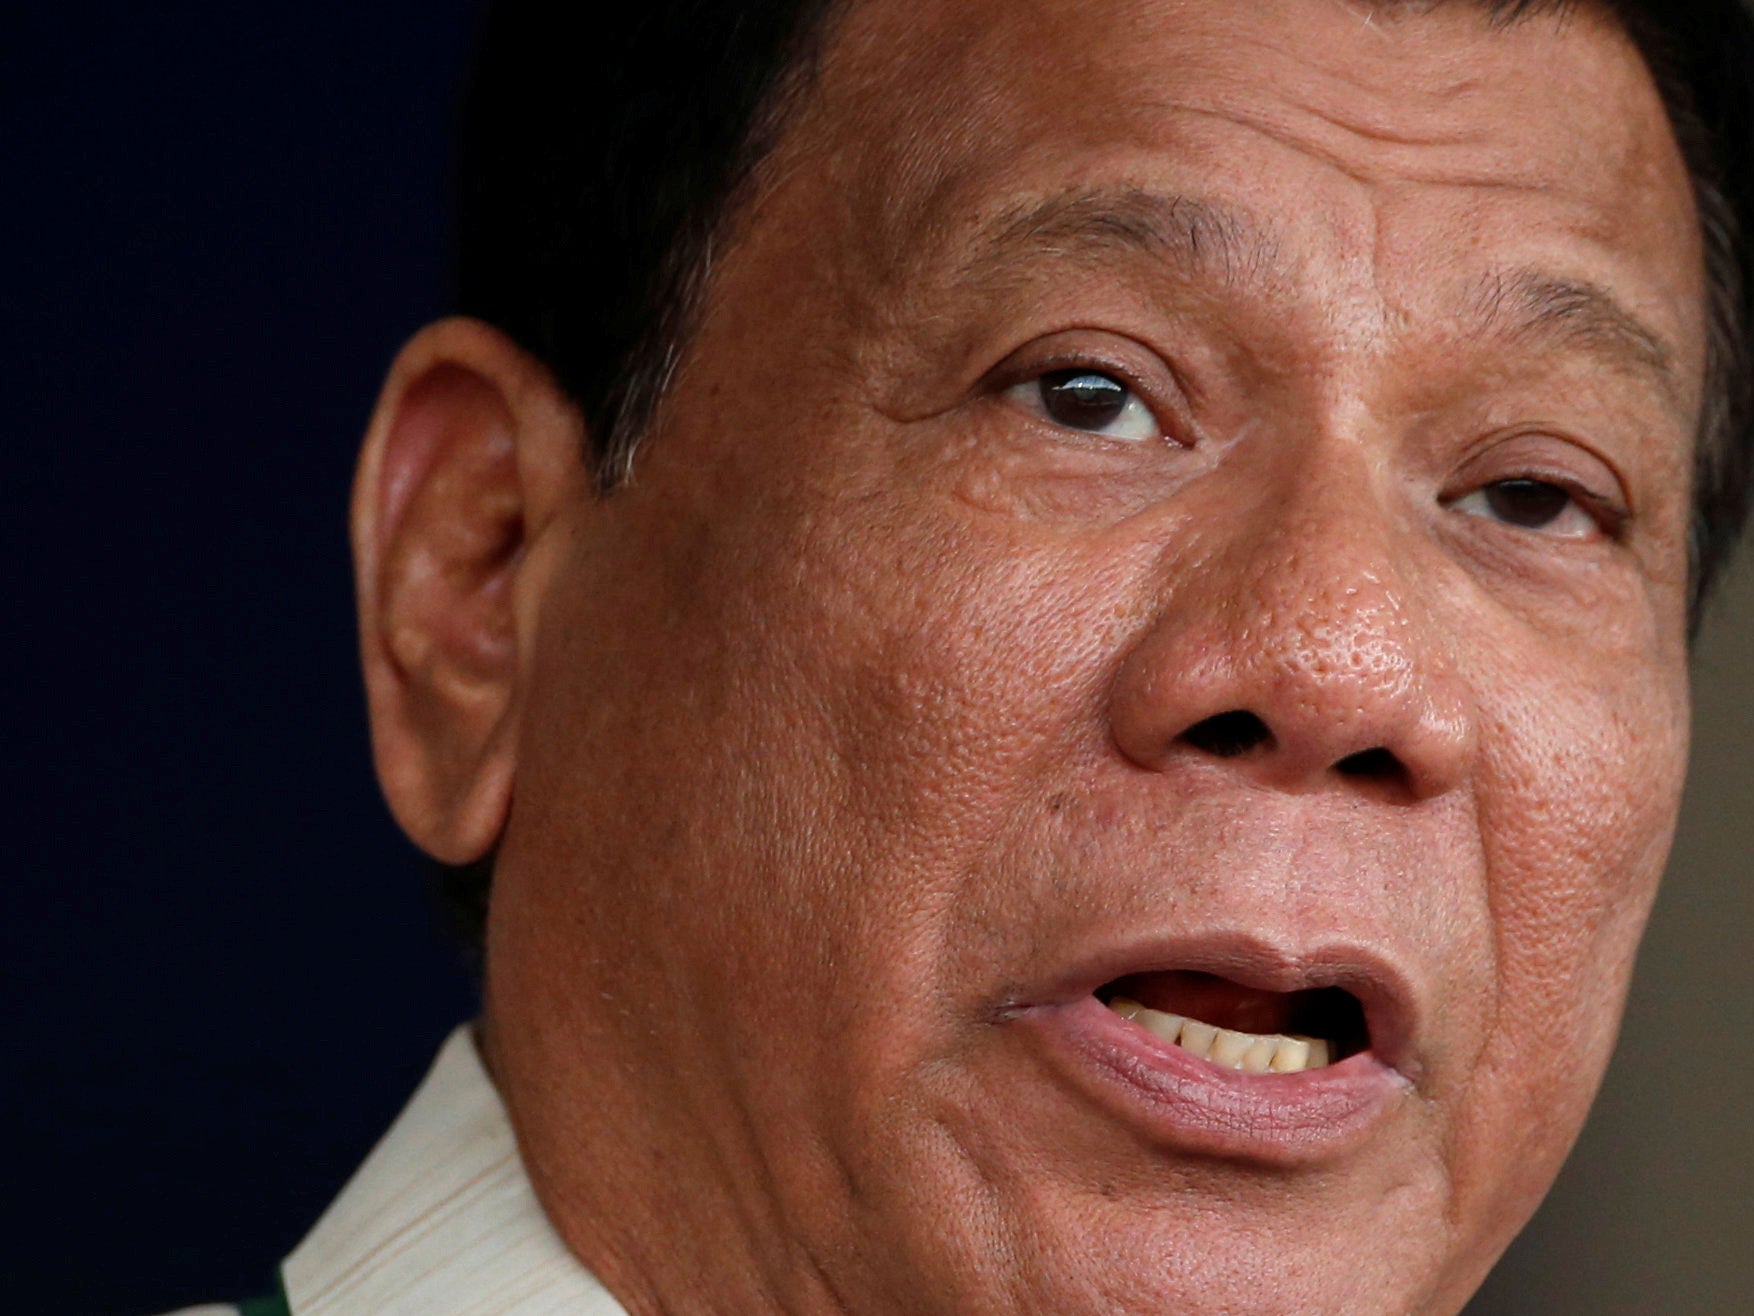 Filipino President Rodrigo Duterte has urged his military to act for him because he can't oppose China's might diplomatically